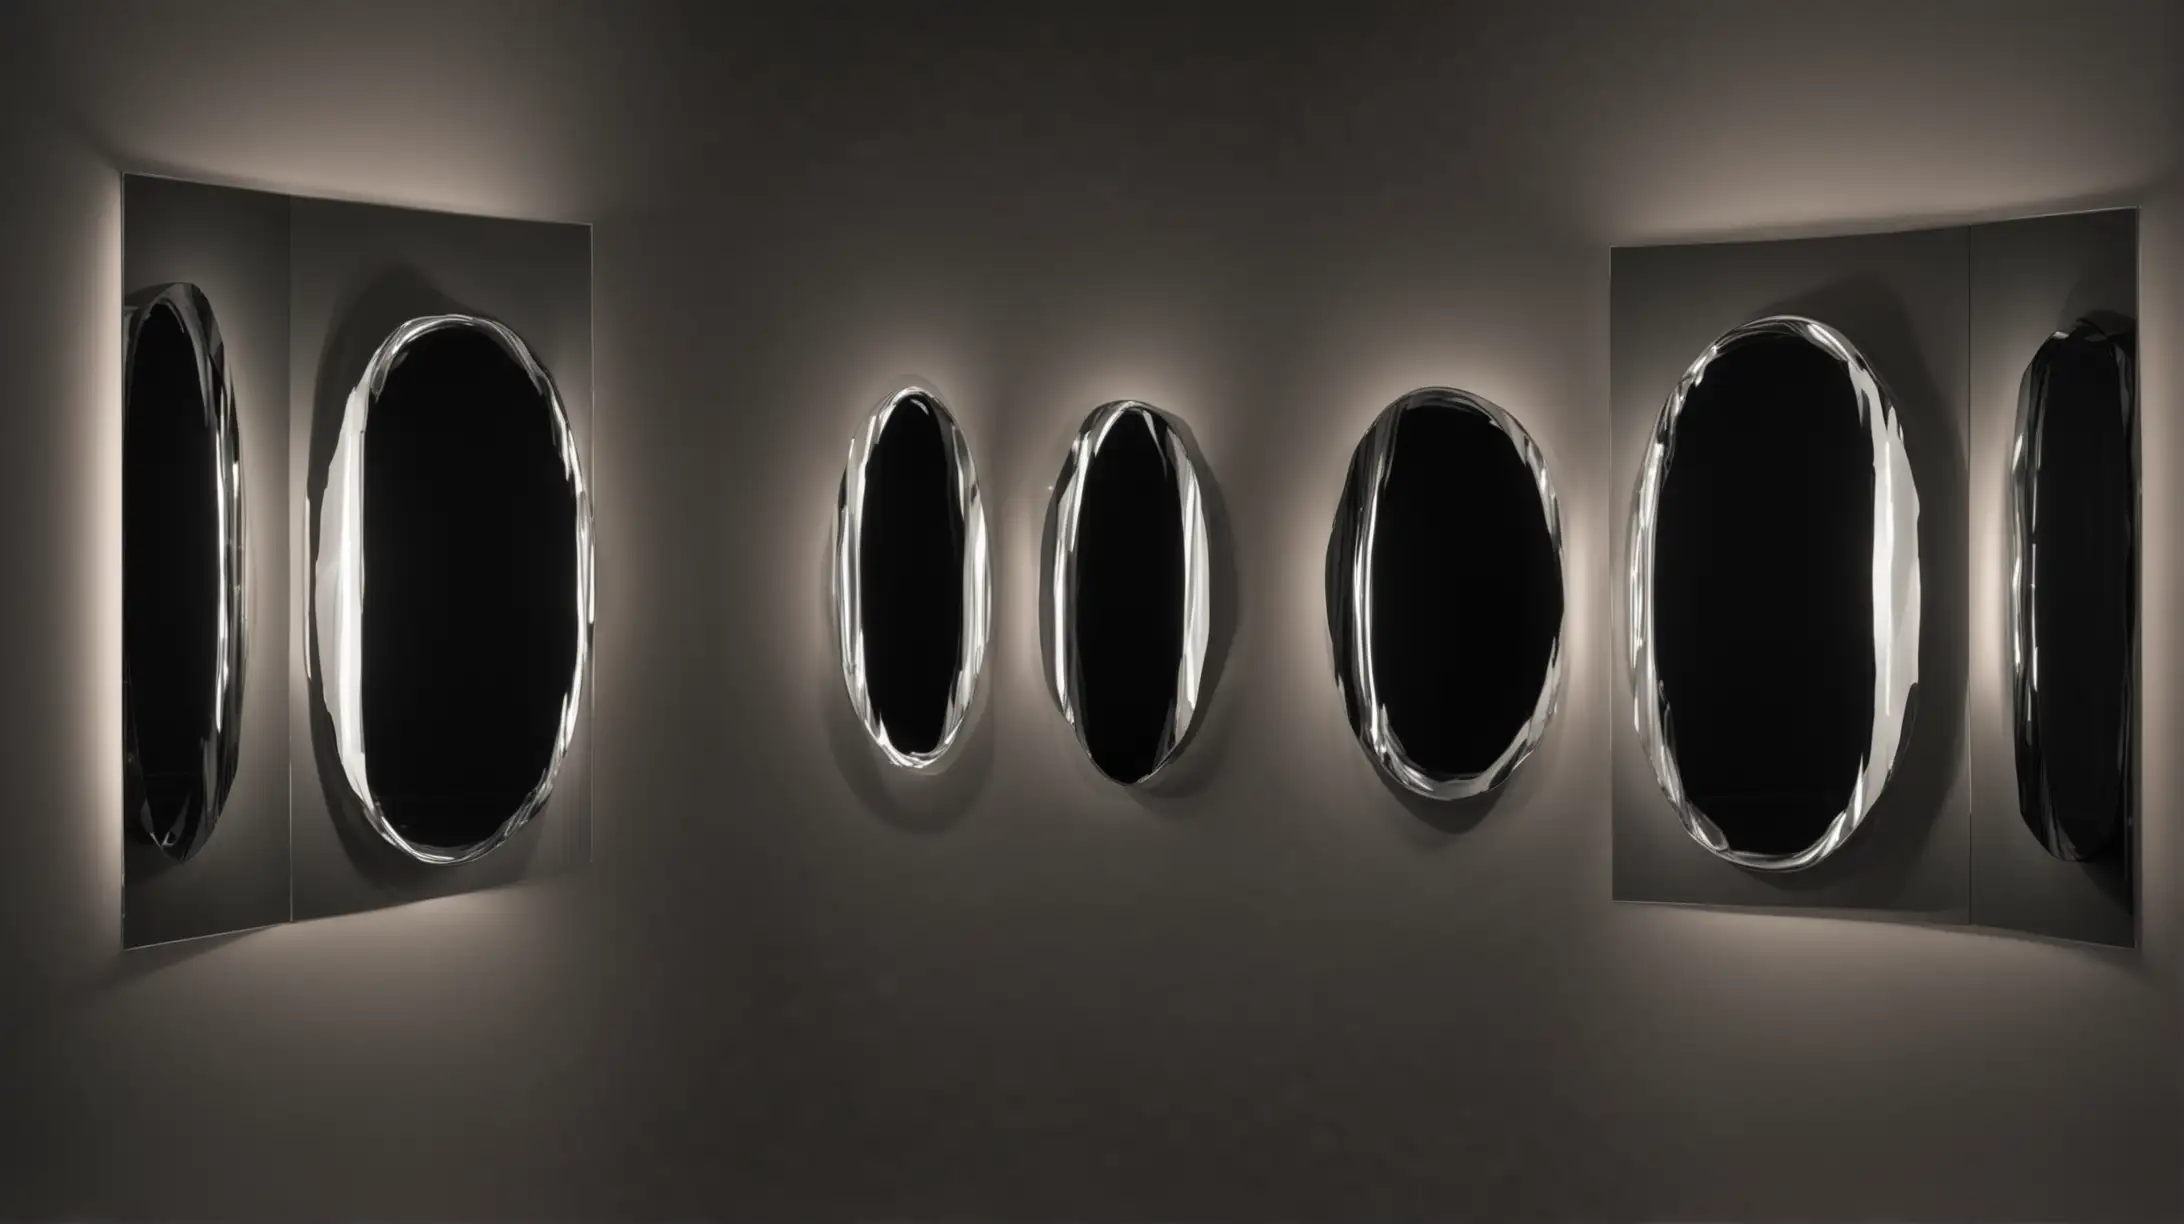 A Series of Mirrors Reflecting Light into Darkness: Symbolizing the spread of positivity and how a new attitude can illuminate and transform dark or challenging situations.